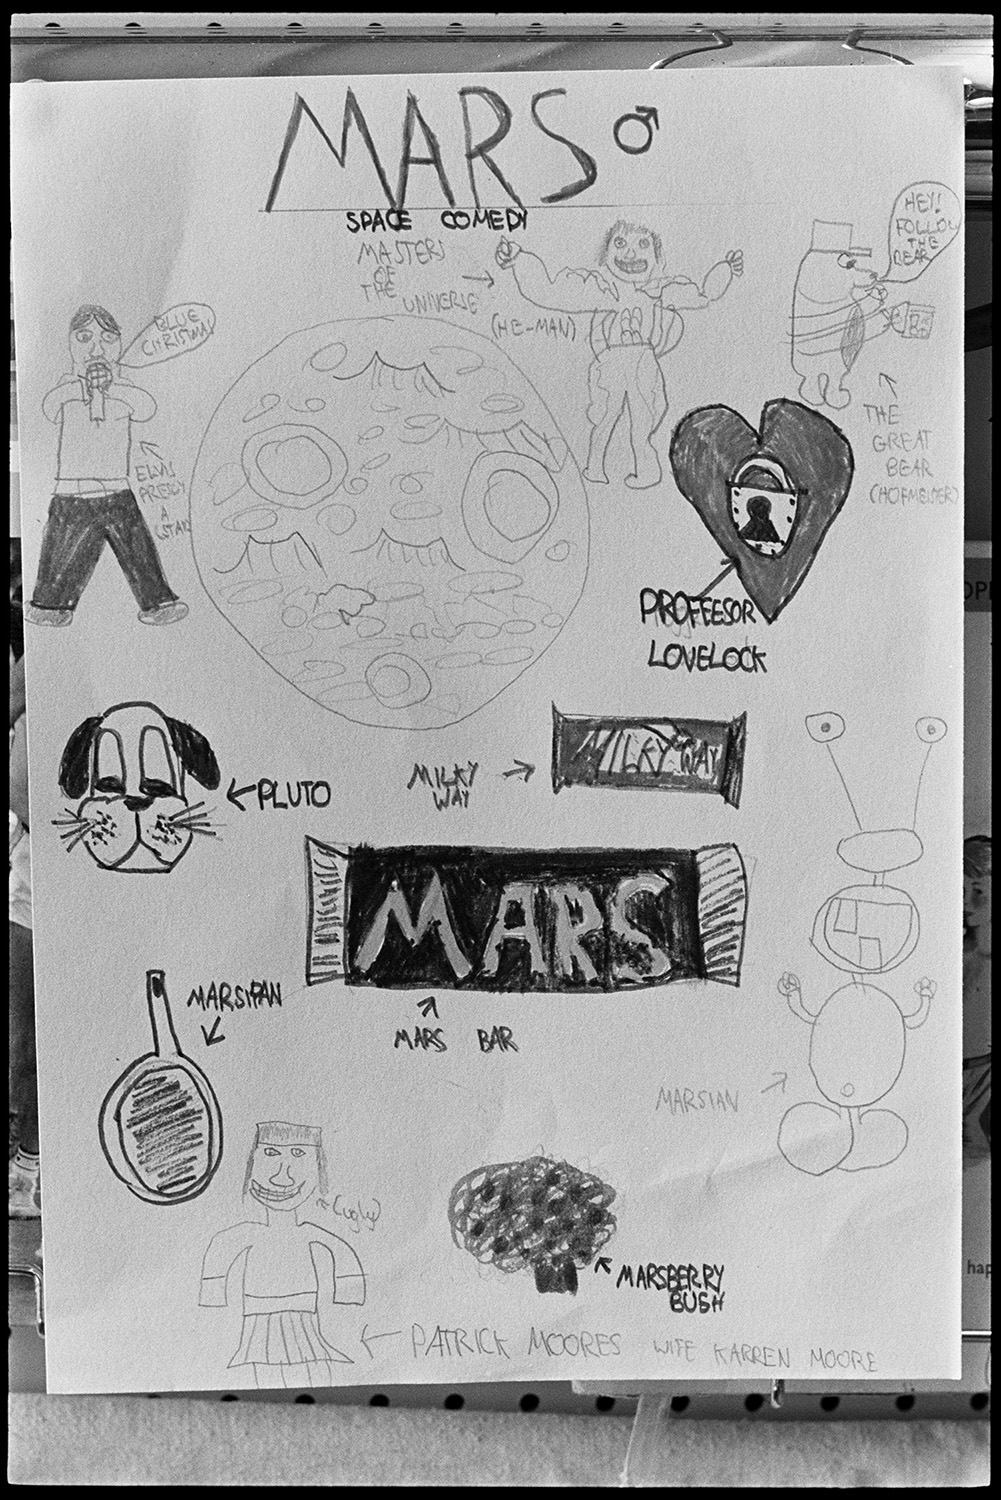 Schoolchildren working on space project pretending to be astronauts in spacecraft. 
[A poster about Mars made by a child at Bideford Primary School for their space project at the School.]